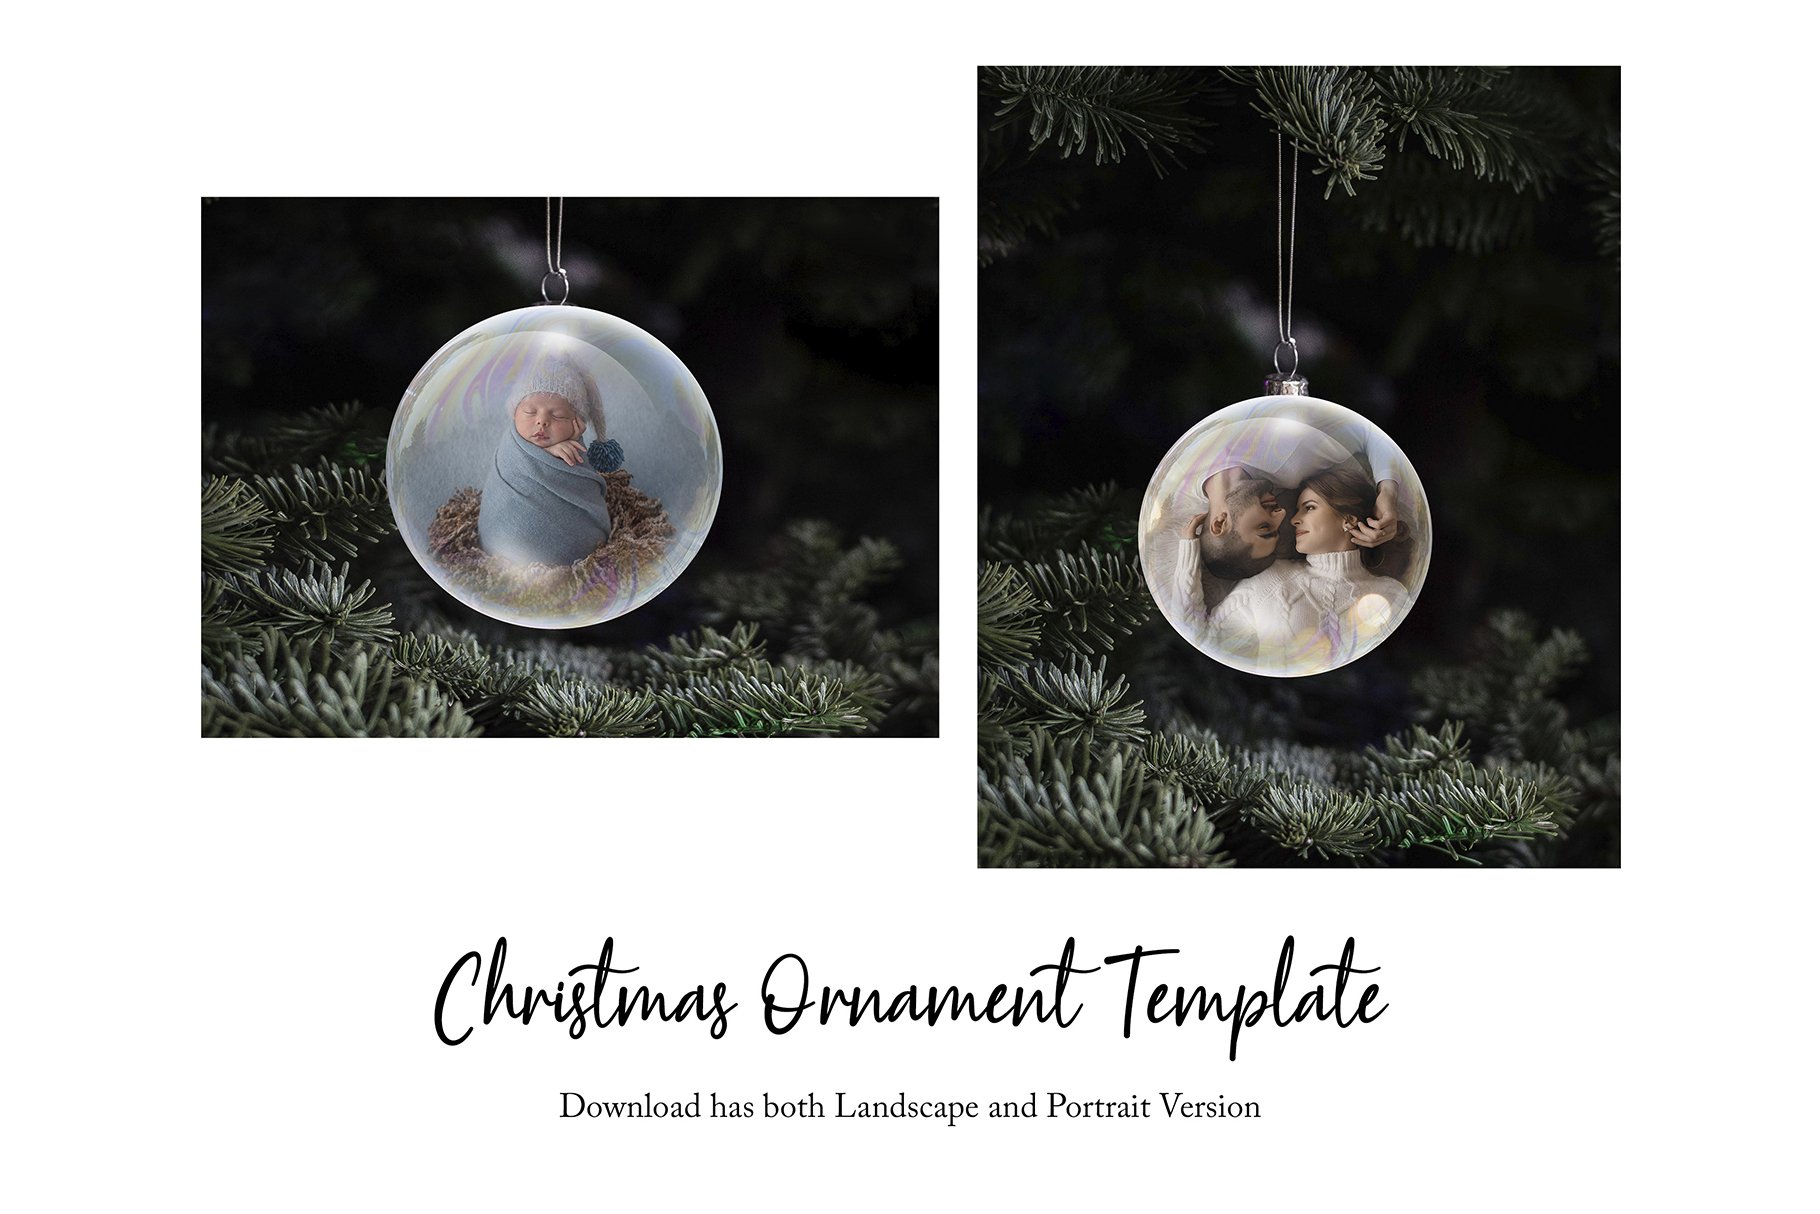 Christmas Ornaments Template PNGcover image.